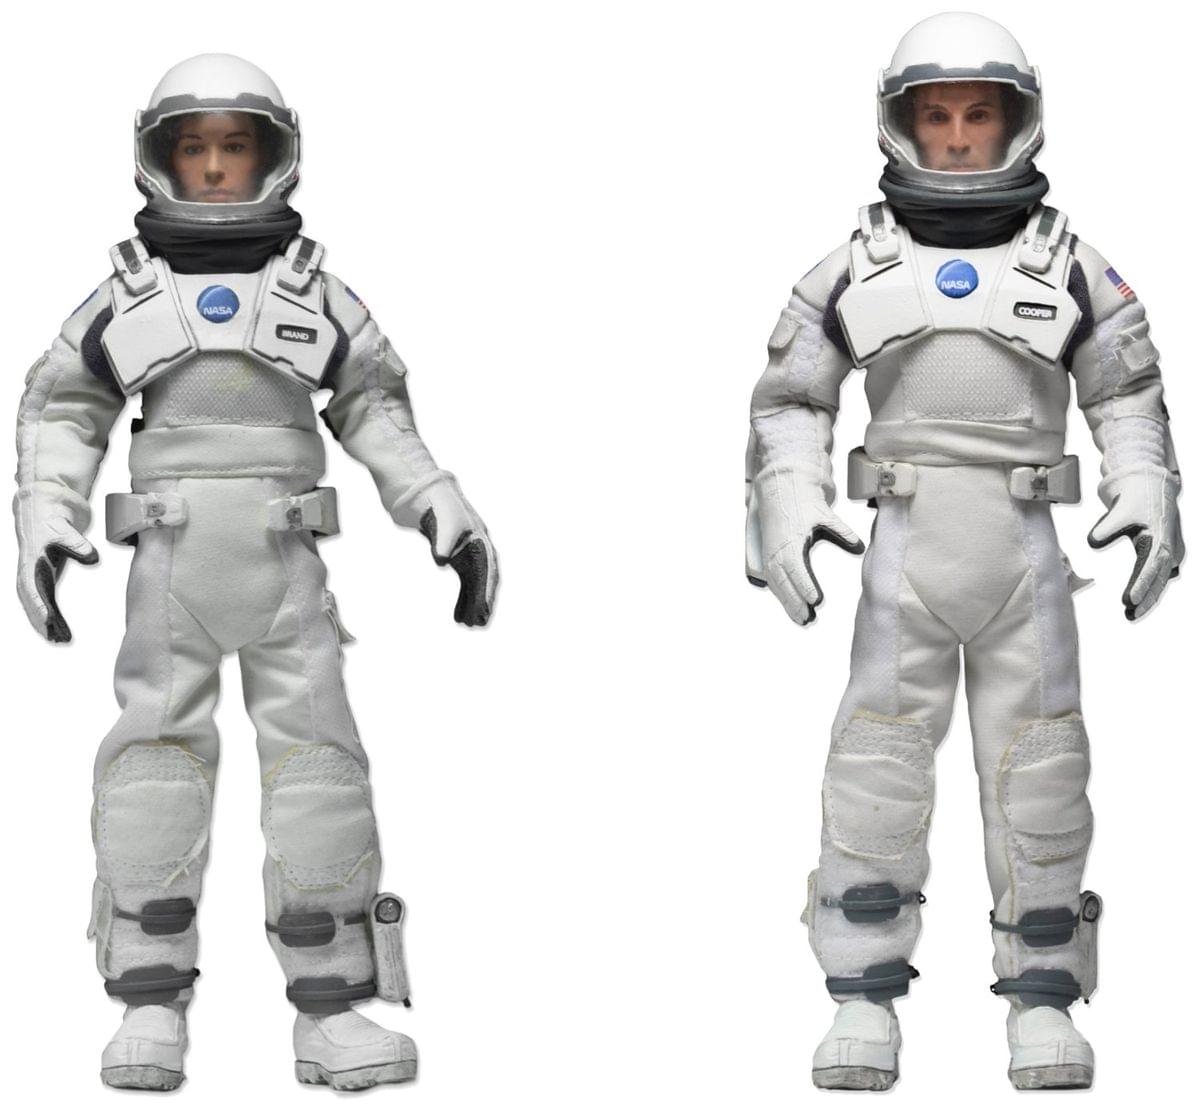 Interstellar 8" Clothed Action Figure 2-Pack